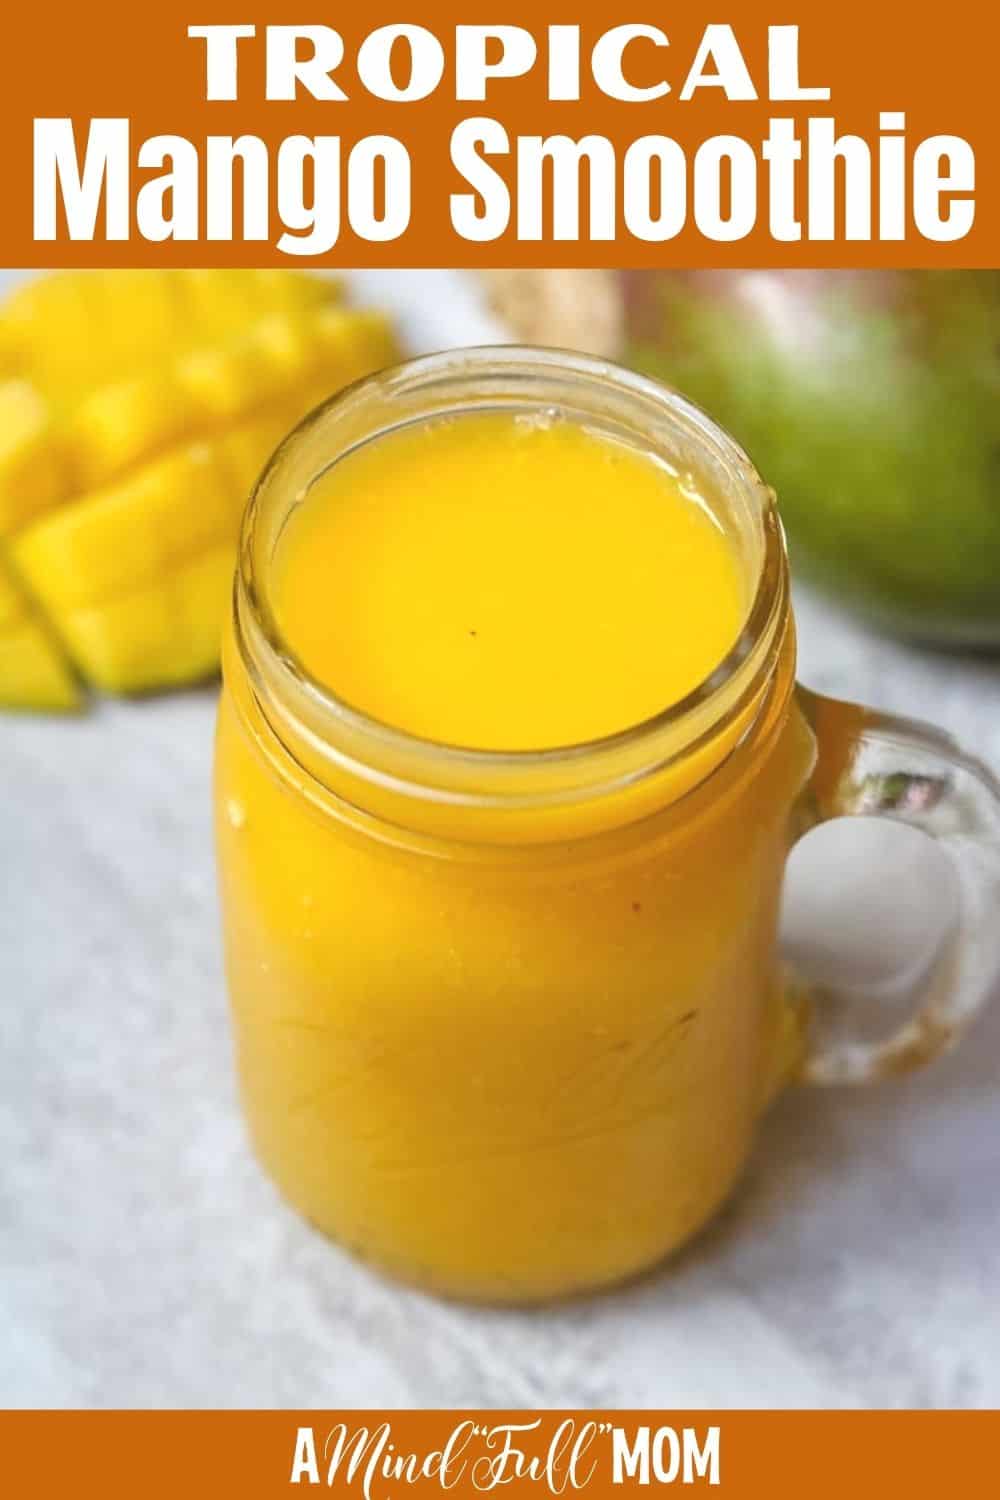 This Mango Smoothie is light, refreshing, and simple to make. Made with mango, orange juice, and banana this simple dairy-free smoothie makes a healthy snack perfect for any time of the day!